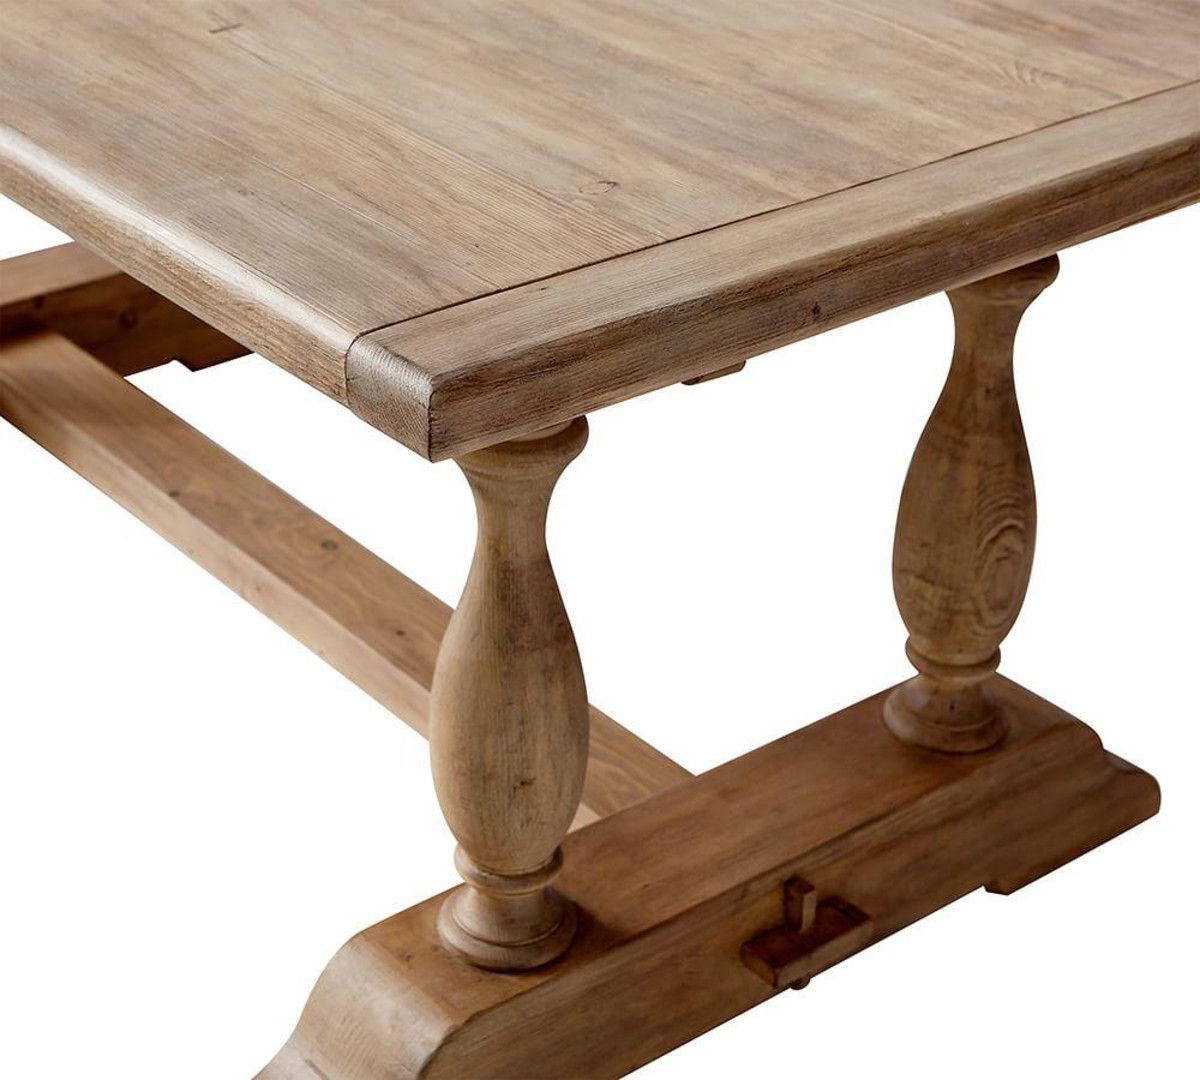 Parkmore Reclaimed Wood Extending Dining Tables Intended For 2019 Parkmore Table & Mabry Chair Dining Set (View 1 of 25)